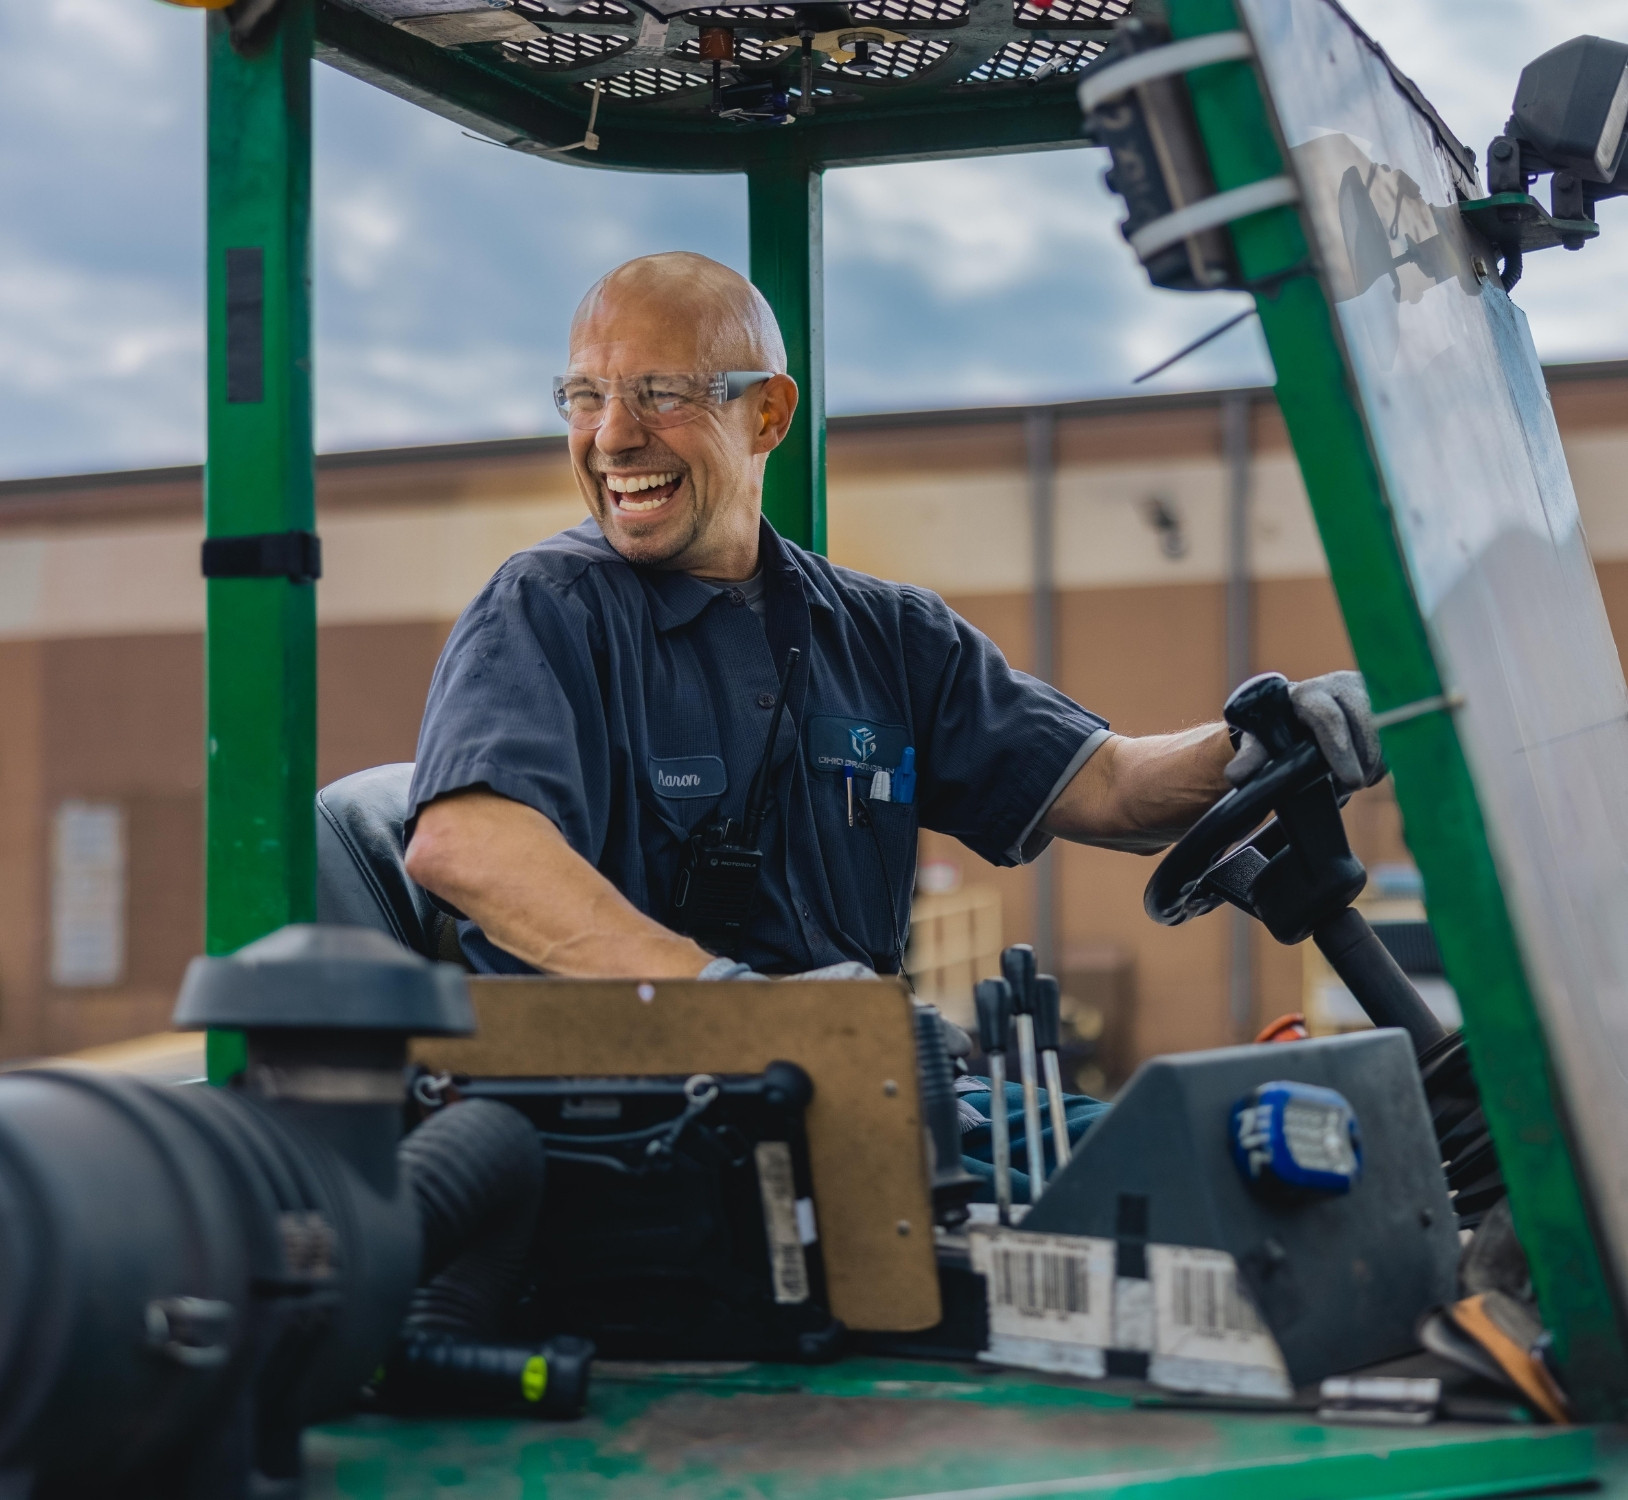 Employee smiles as he moves grating products indoors using a forklift